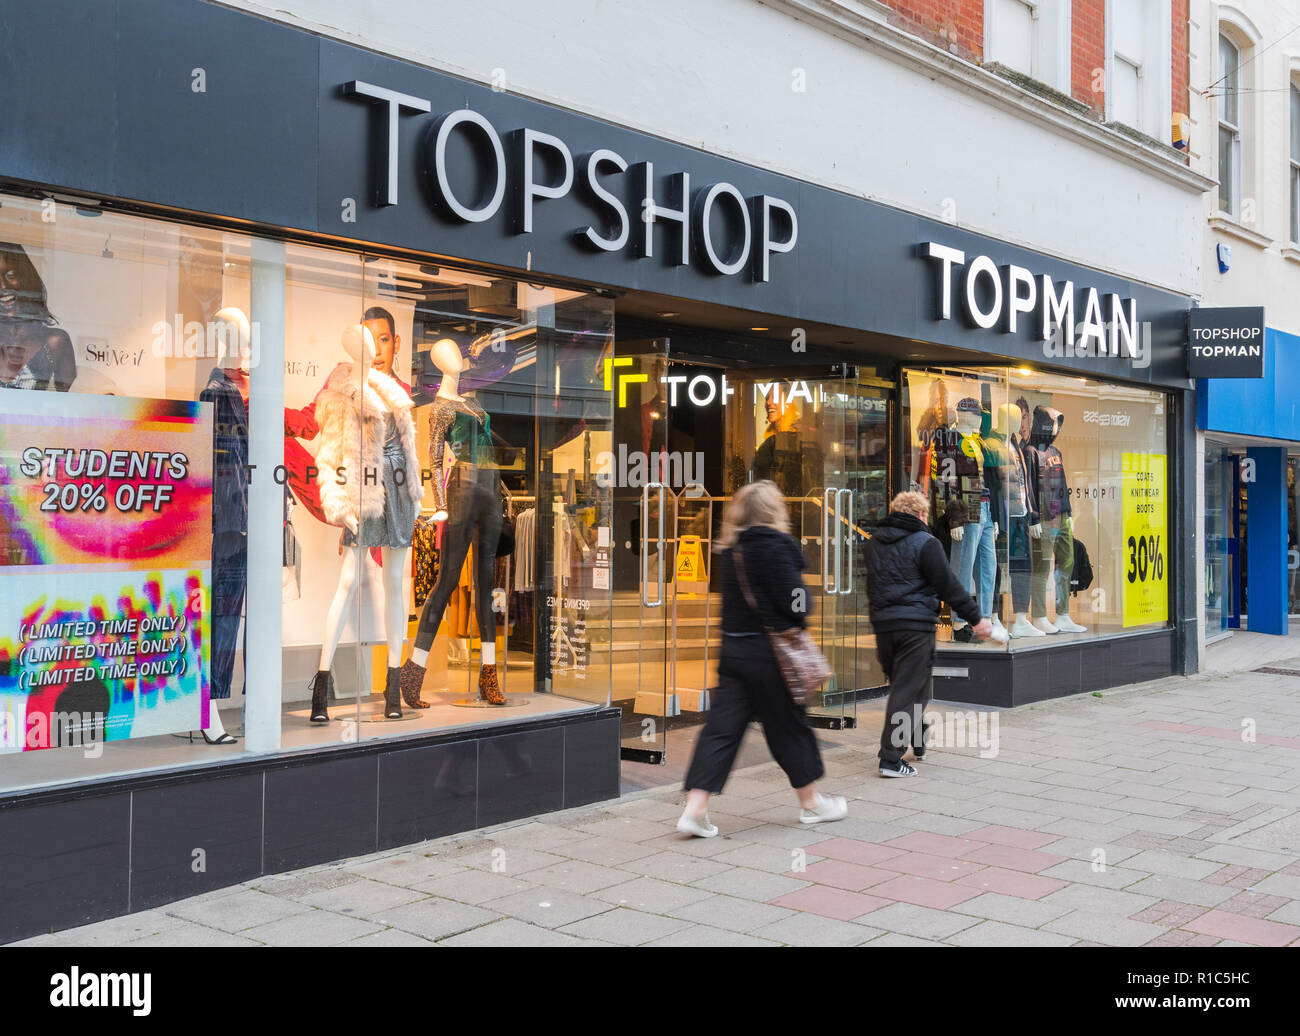 Topshop Topman clothing retail store front entrance in Worthing, West Sussex, England, UK. Stock Photo